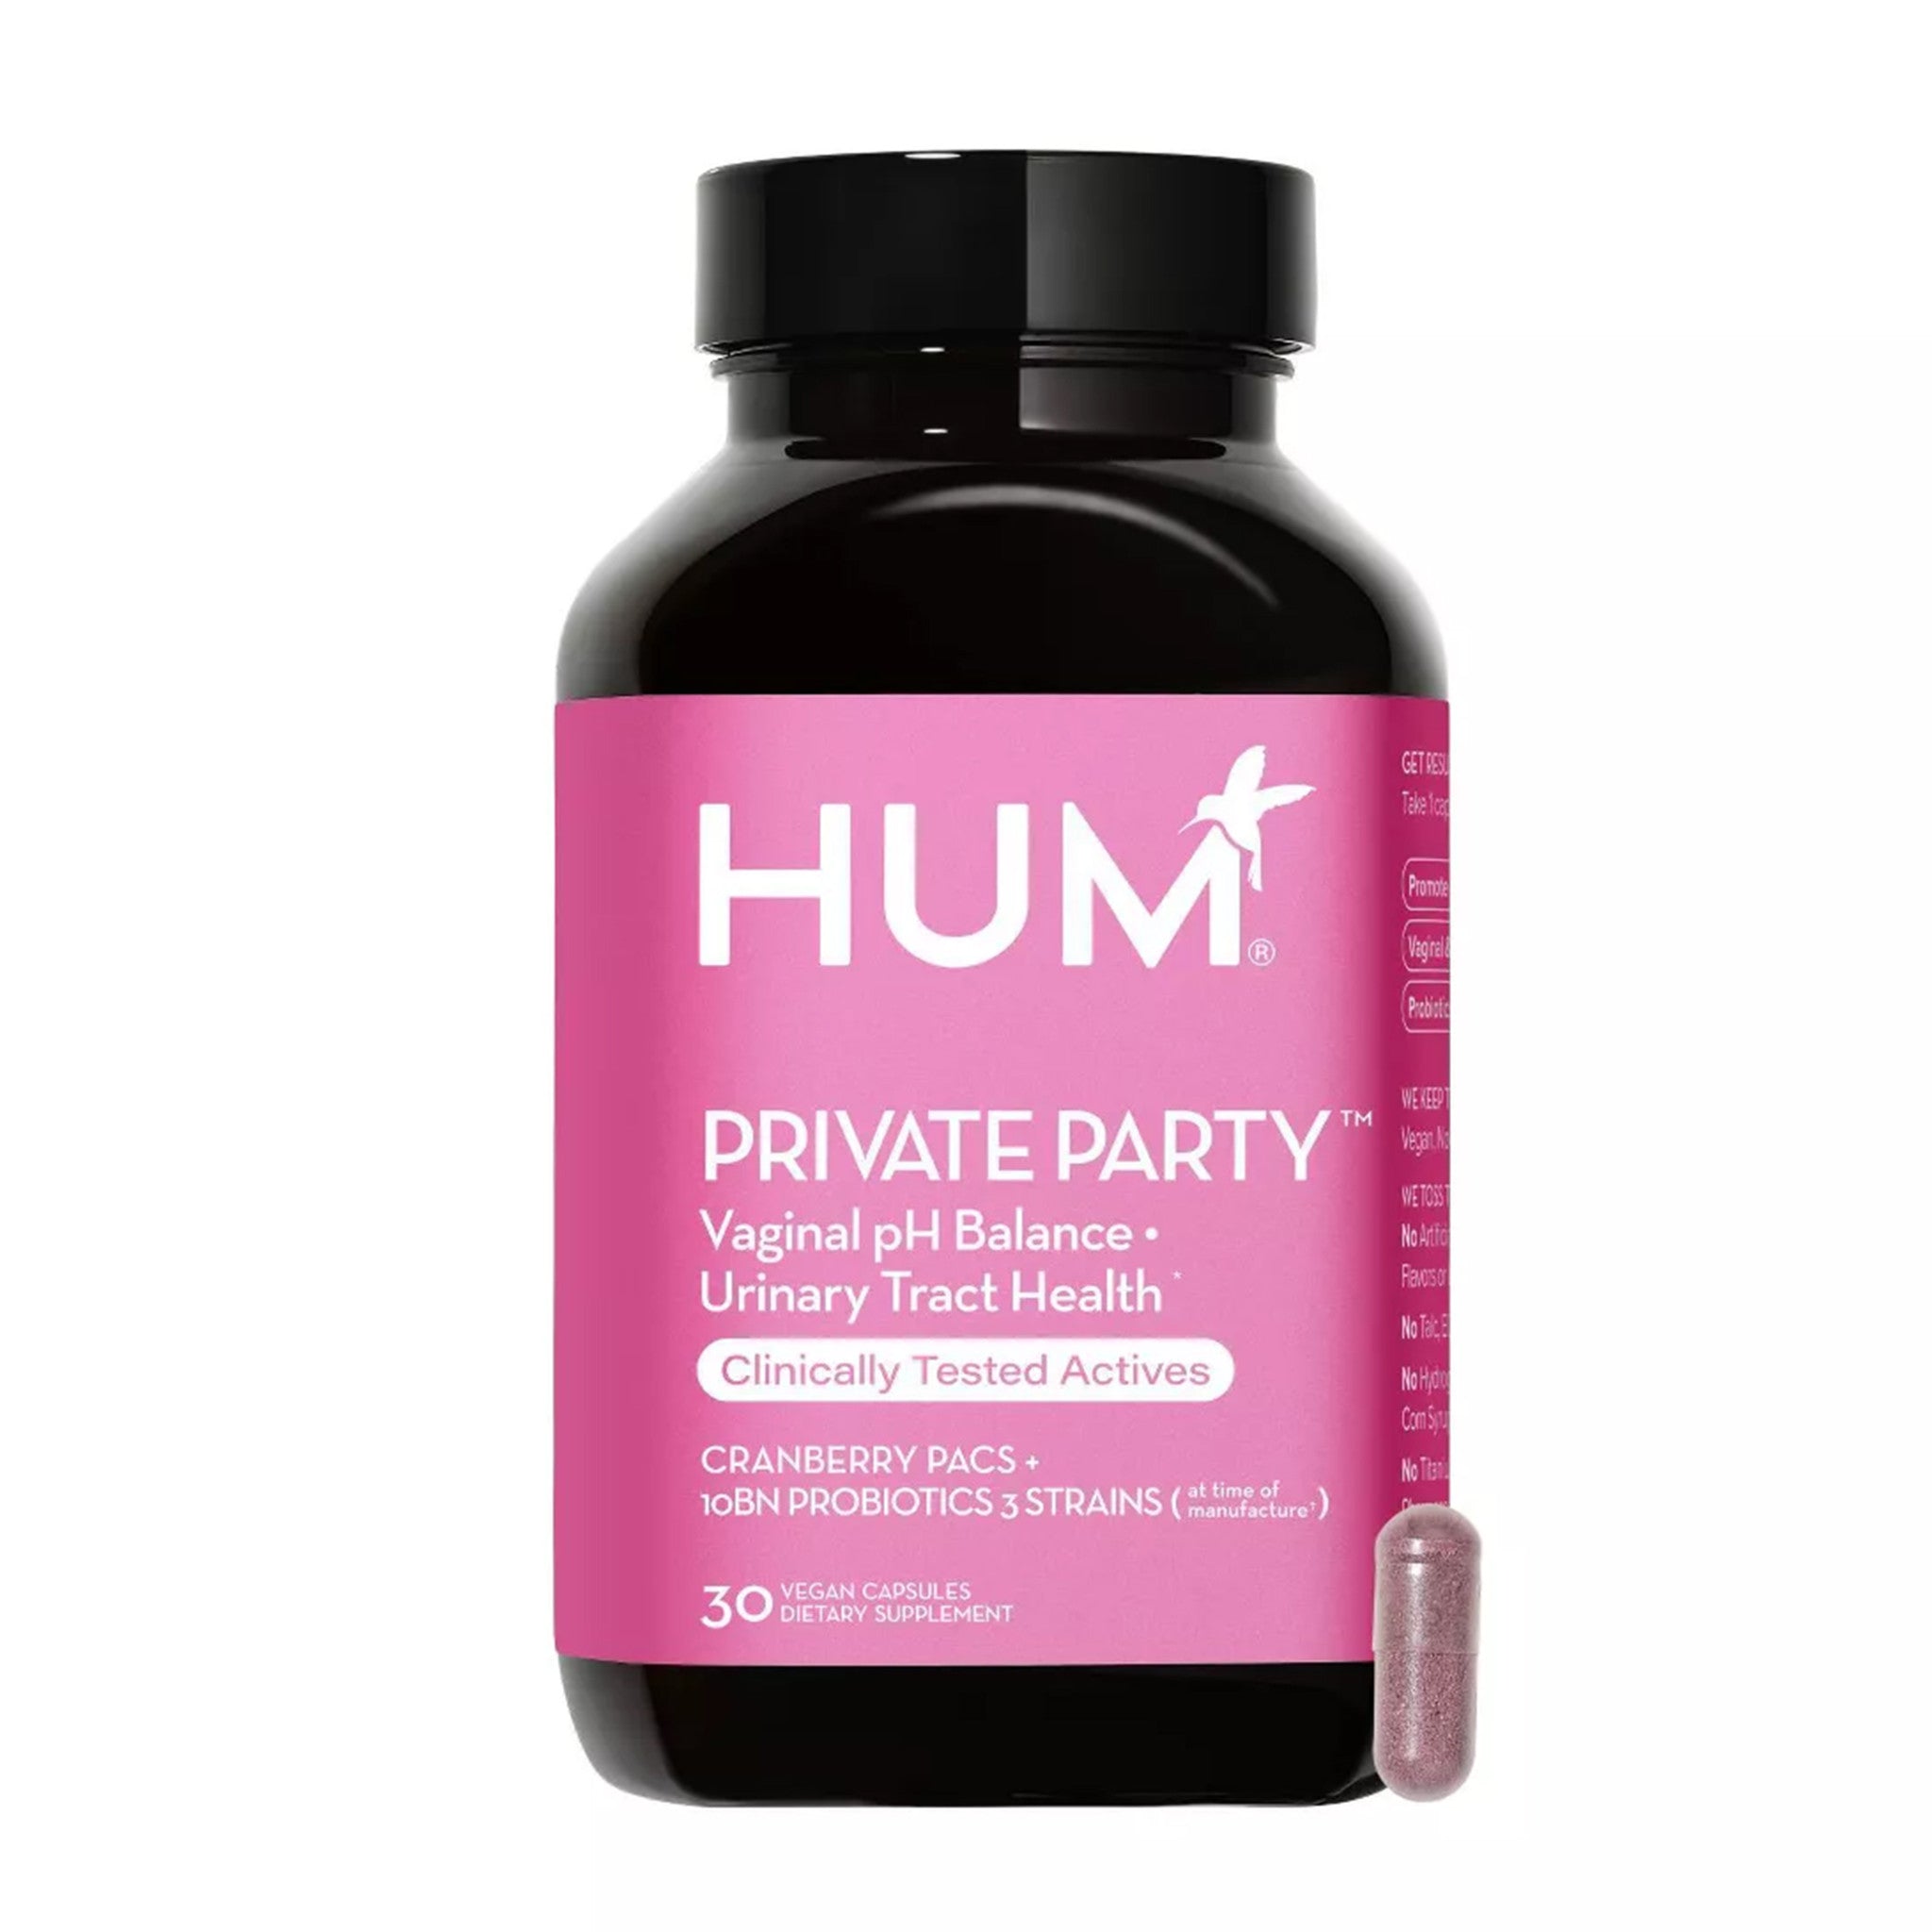 Hum Private Party main image.